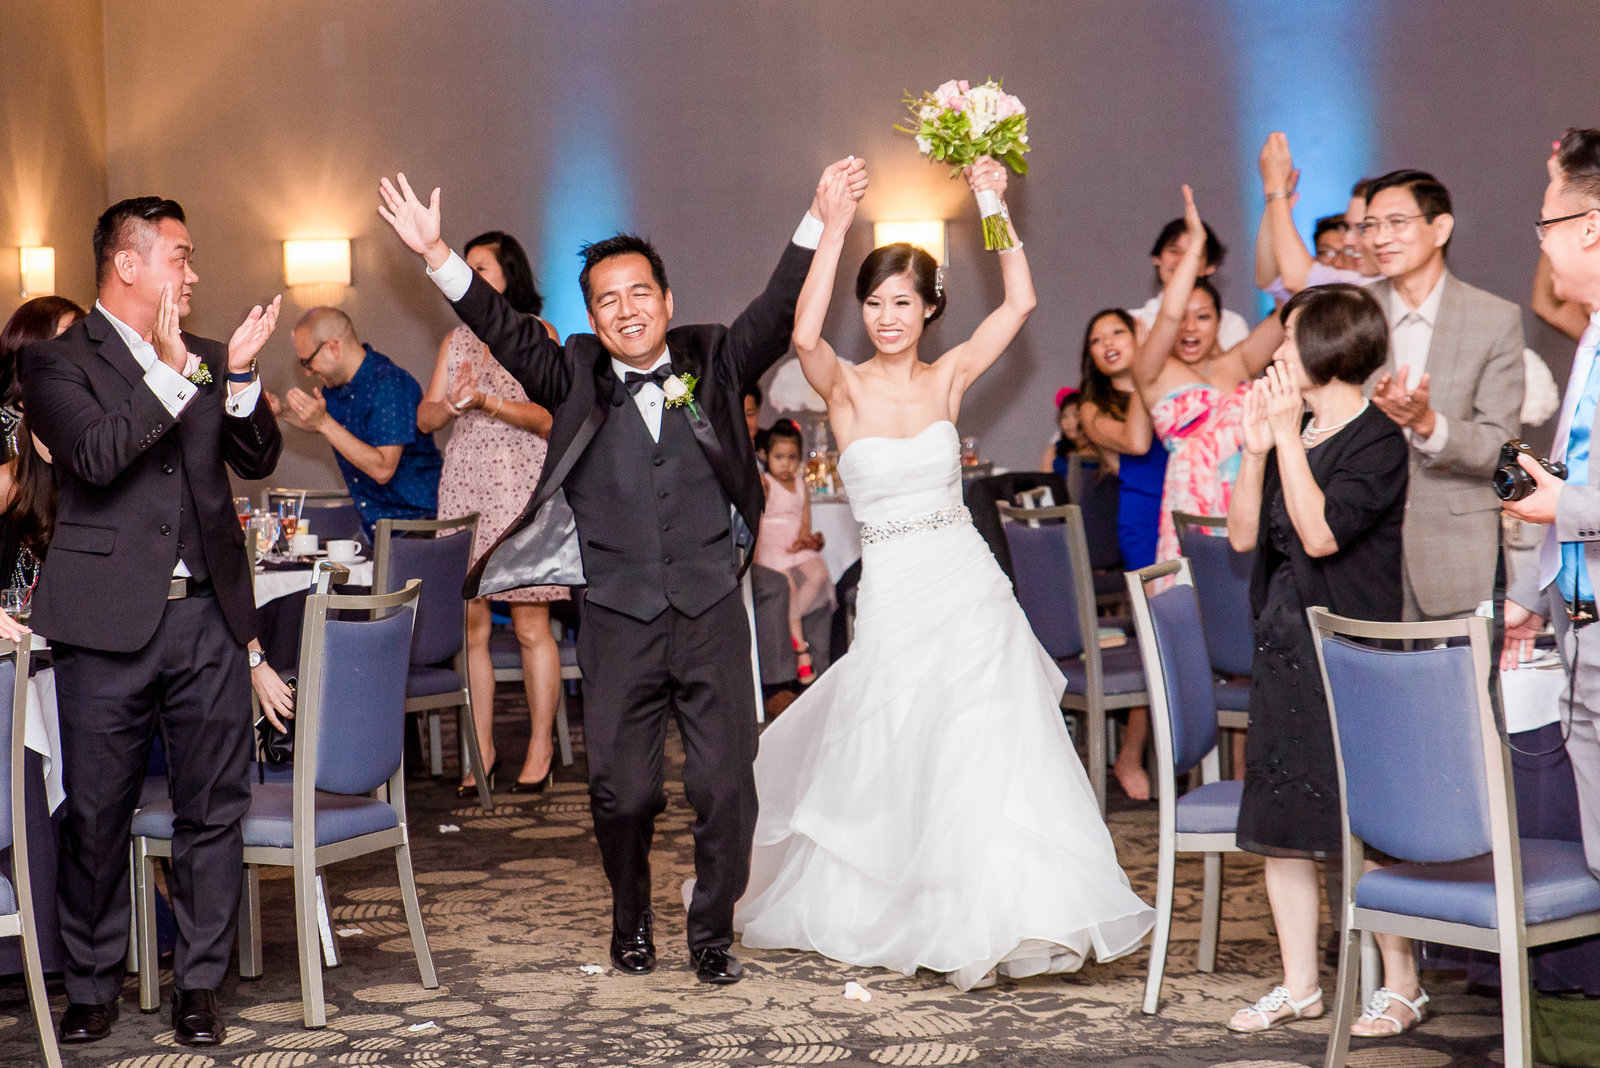 Bride and groom make their entrance in ballroom